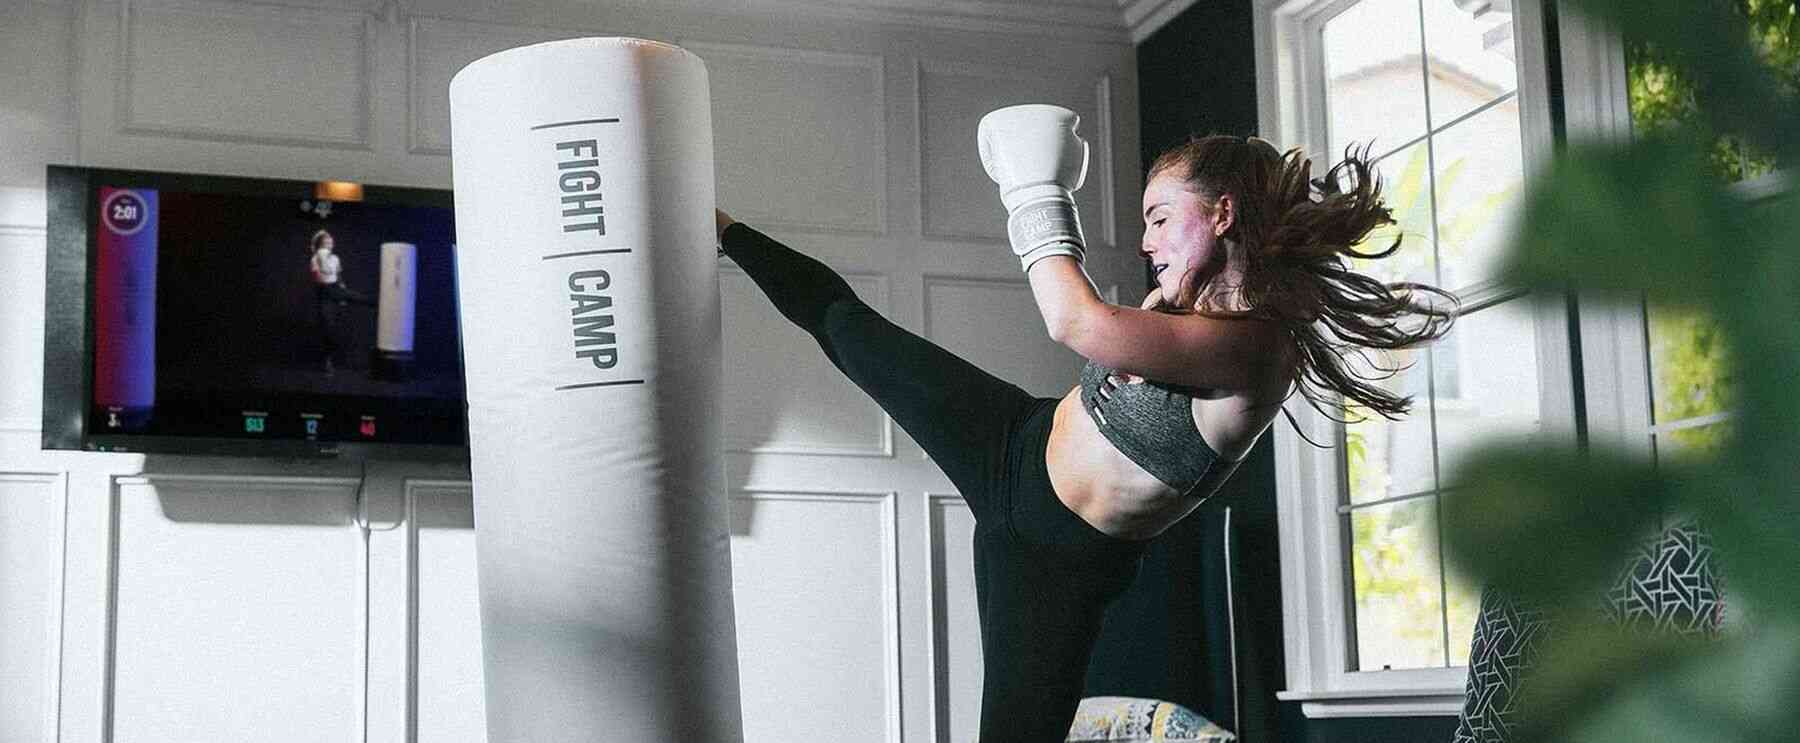 get toned fast with kickboxing at home optimized